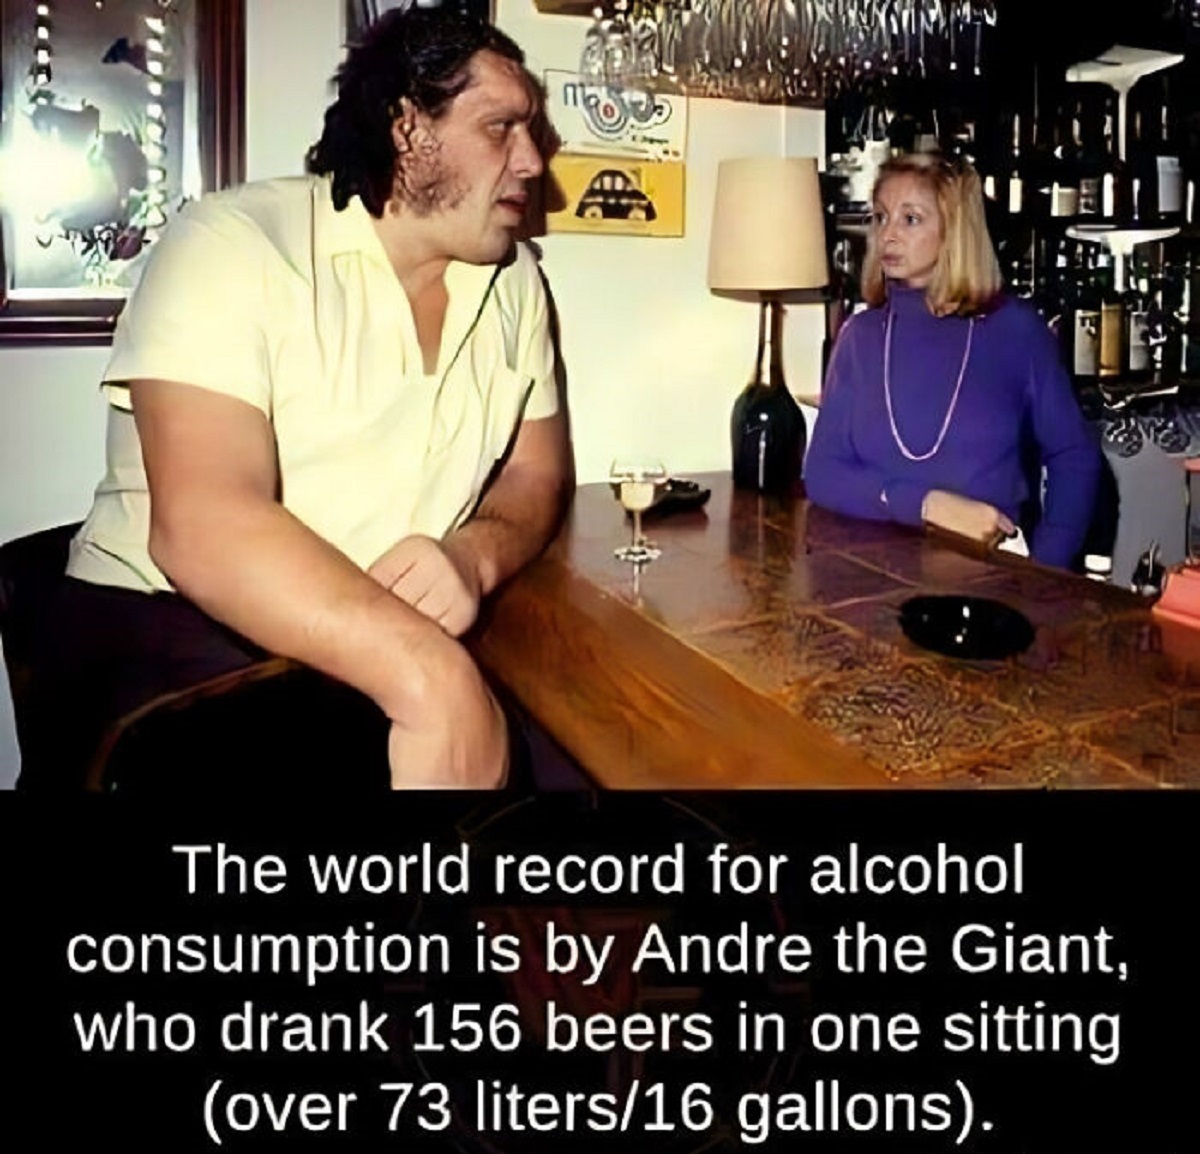 andre the giant world record - The world record for alcohol consumption is by Andre the Giant, who drank 156 beers in one sitting over 73 liters16 gallons.